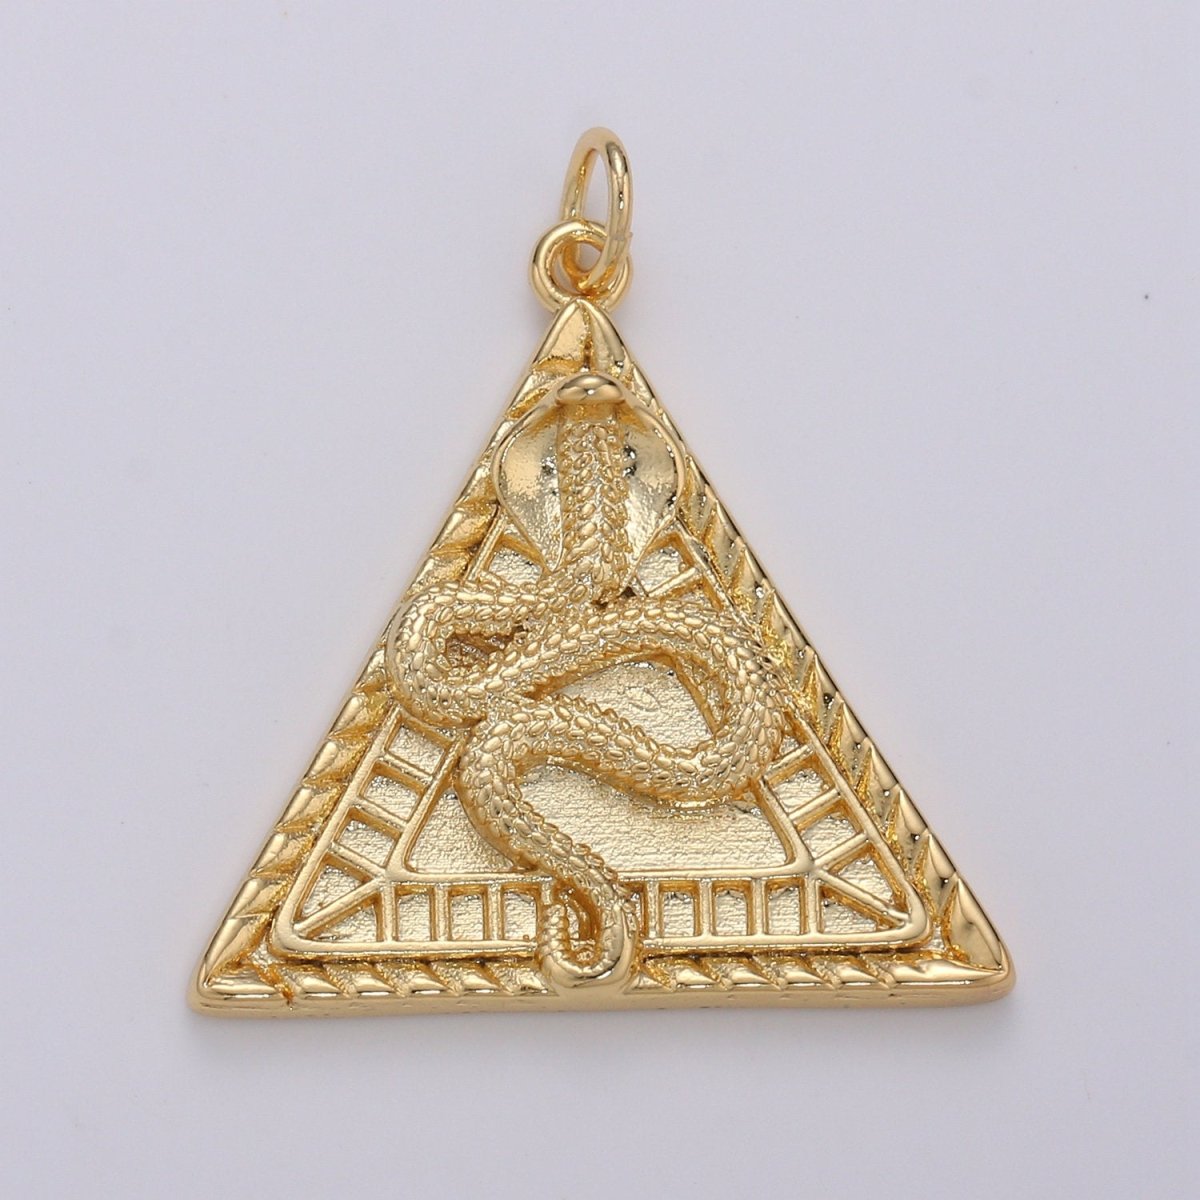 Dainty 14K Gold Filled Pyramid Charm, Snake pendant, Serpent Charm Egyptian Jewelry Supply D-319 - DLUXCA